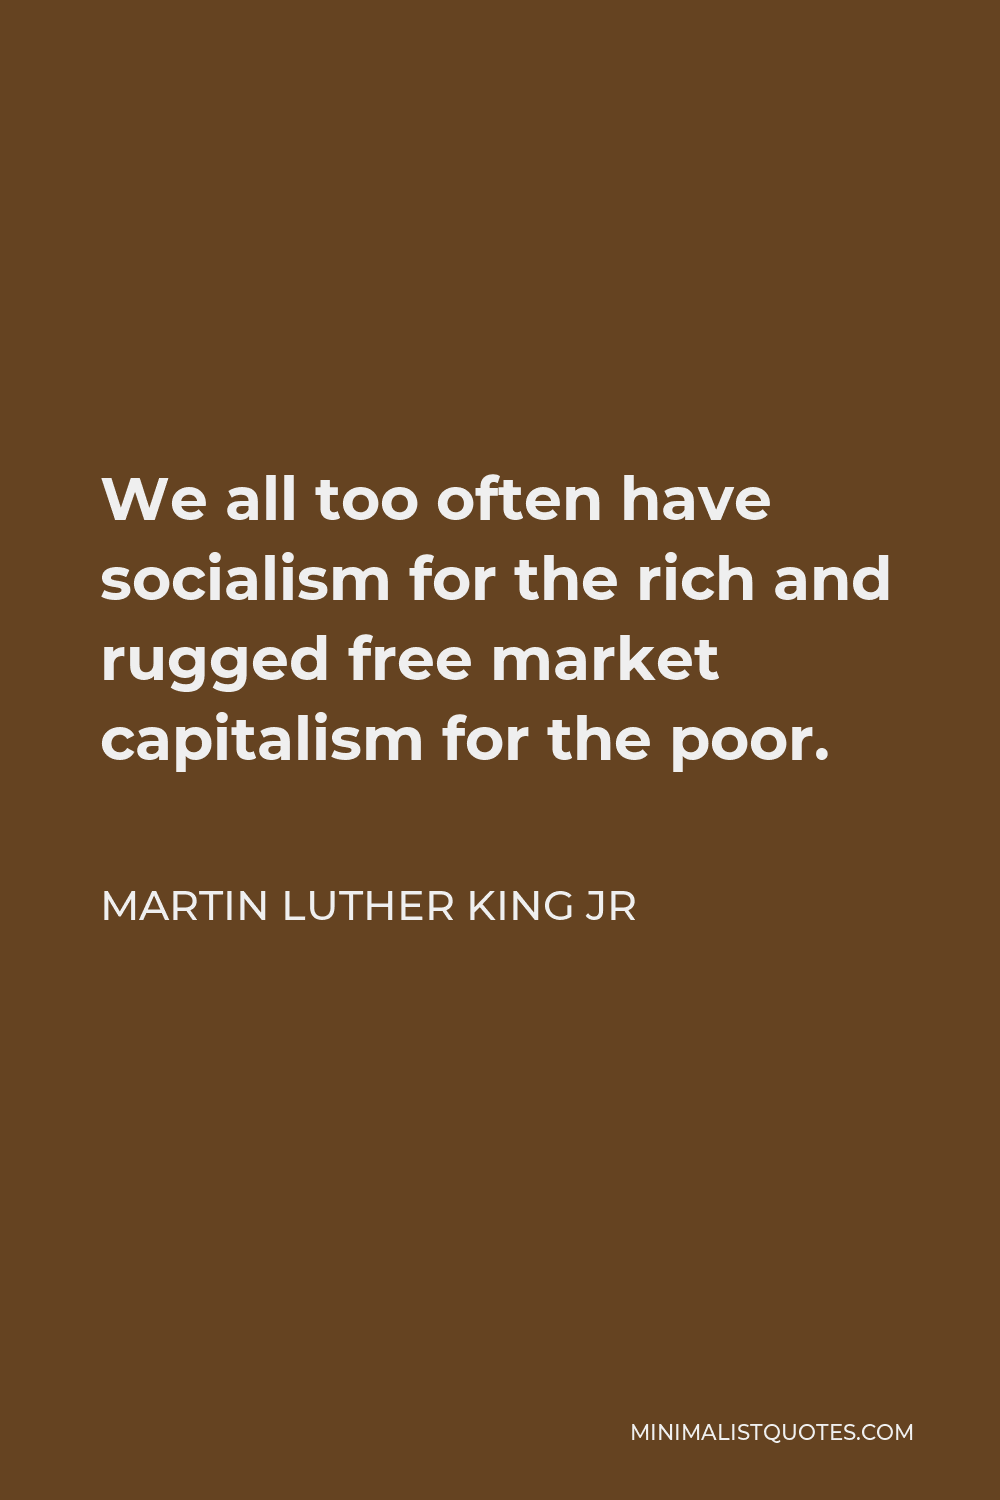 Martin Luther King Jr Quote - We all too often have socialism for the rich and rugged free market capitalism for the poor.